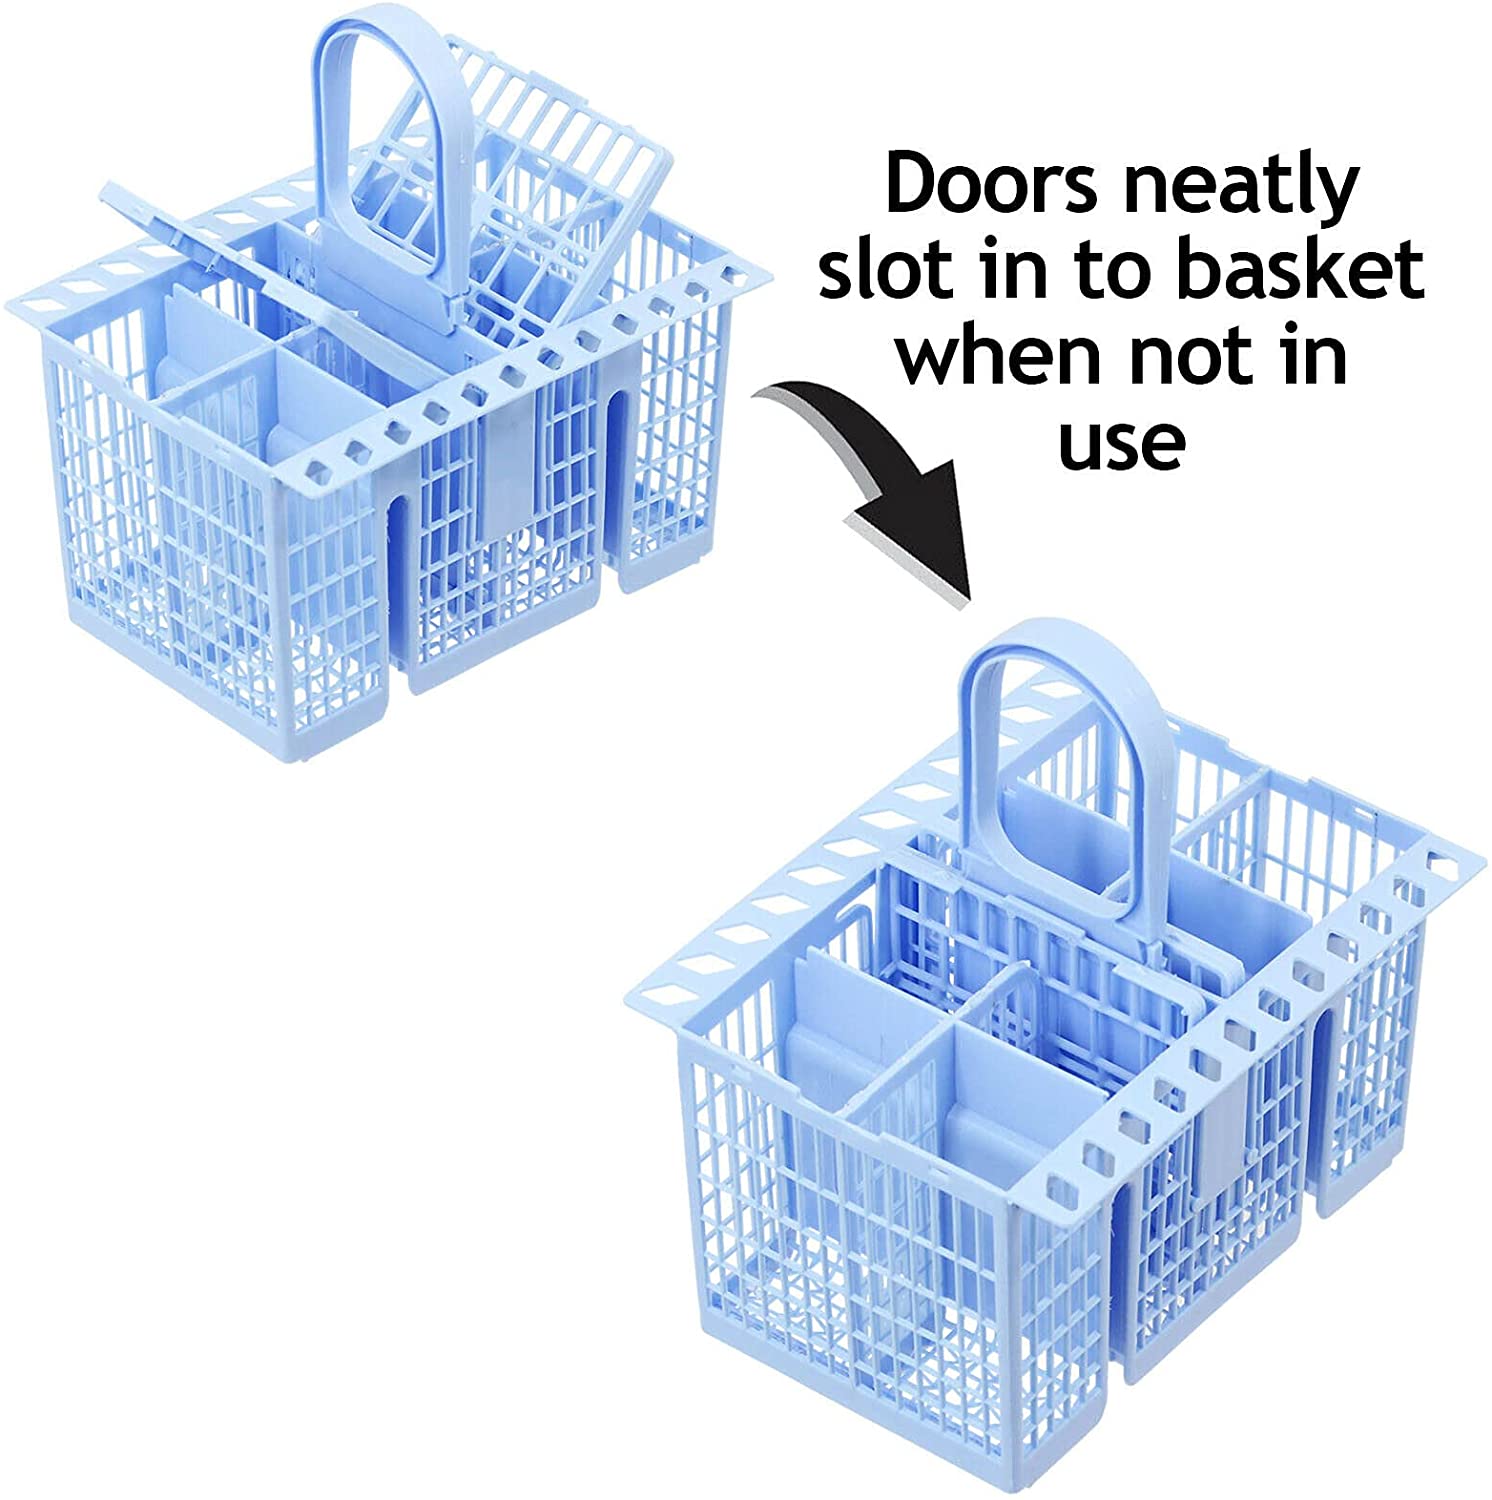 SPARES2GO Cutlery Basket compatible with Servis Dishwasher (Blue, 220 x 208 x 160mm)